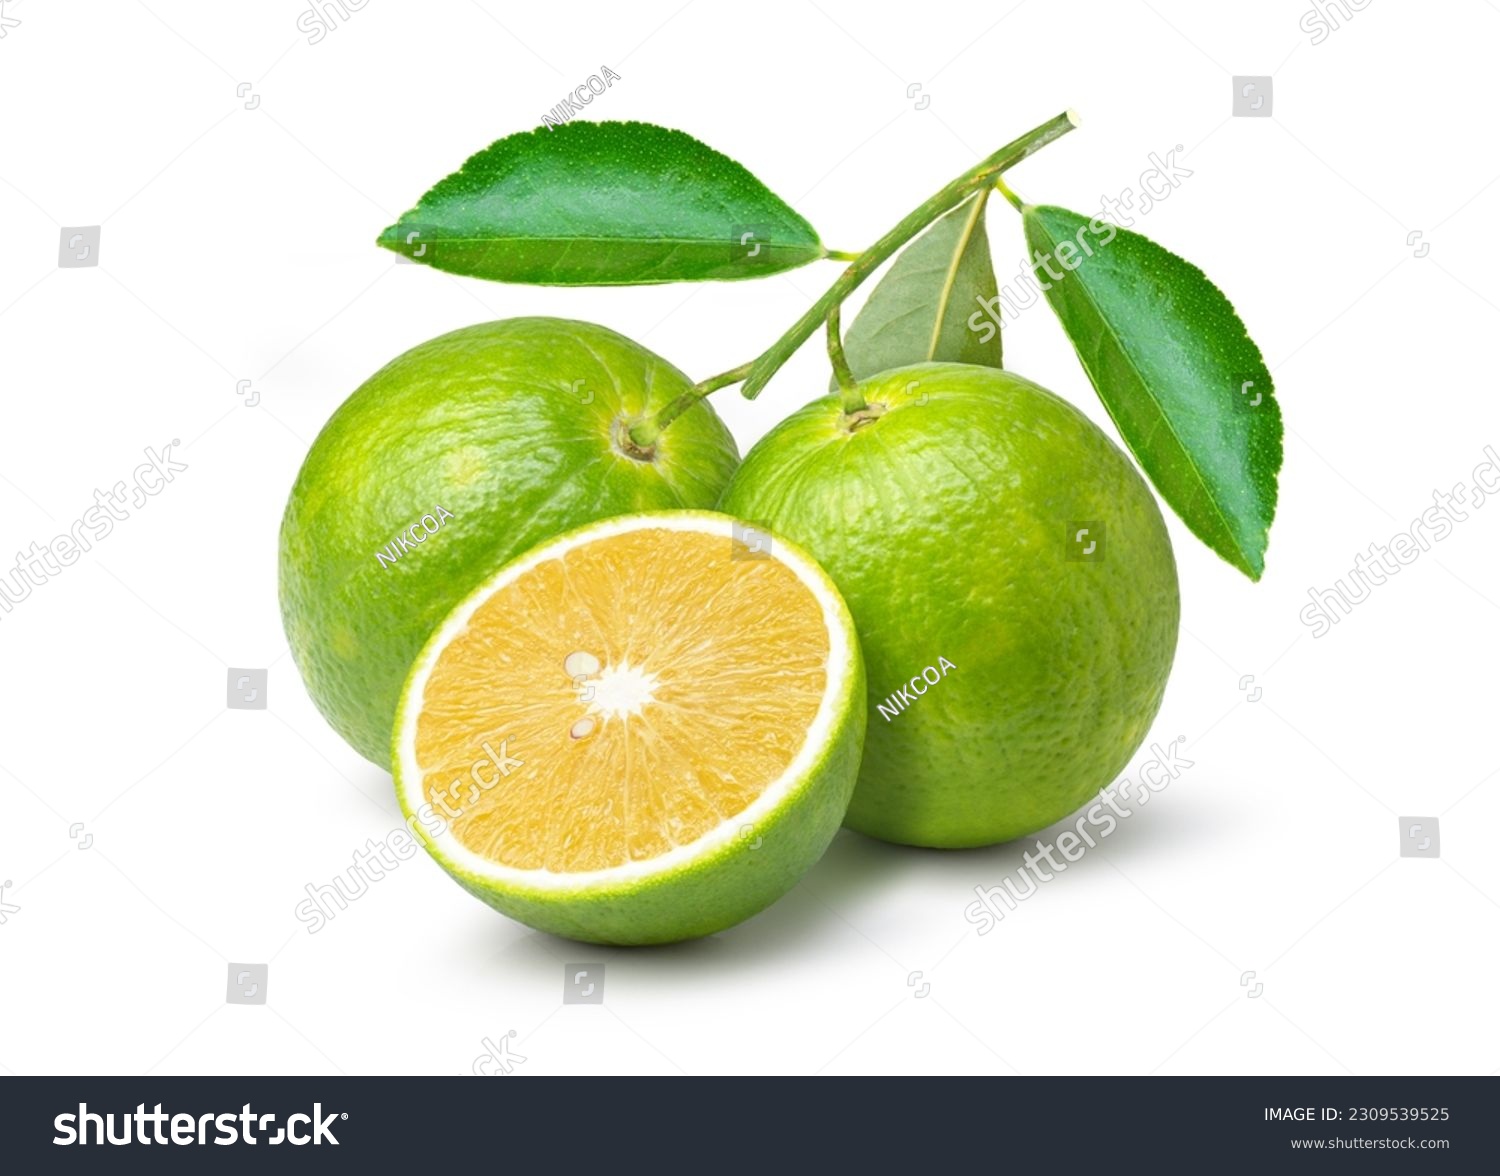 Aurantium citrus (Bitter orange or Seville orange) on branch with green leaves and cut in half sliced isolated on white background. #2309539525